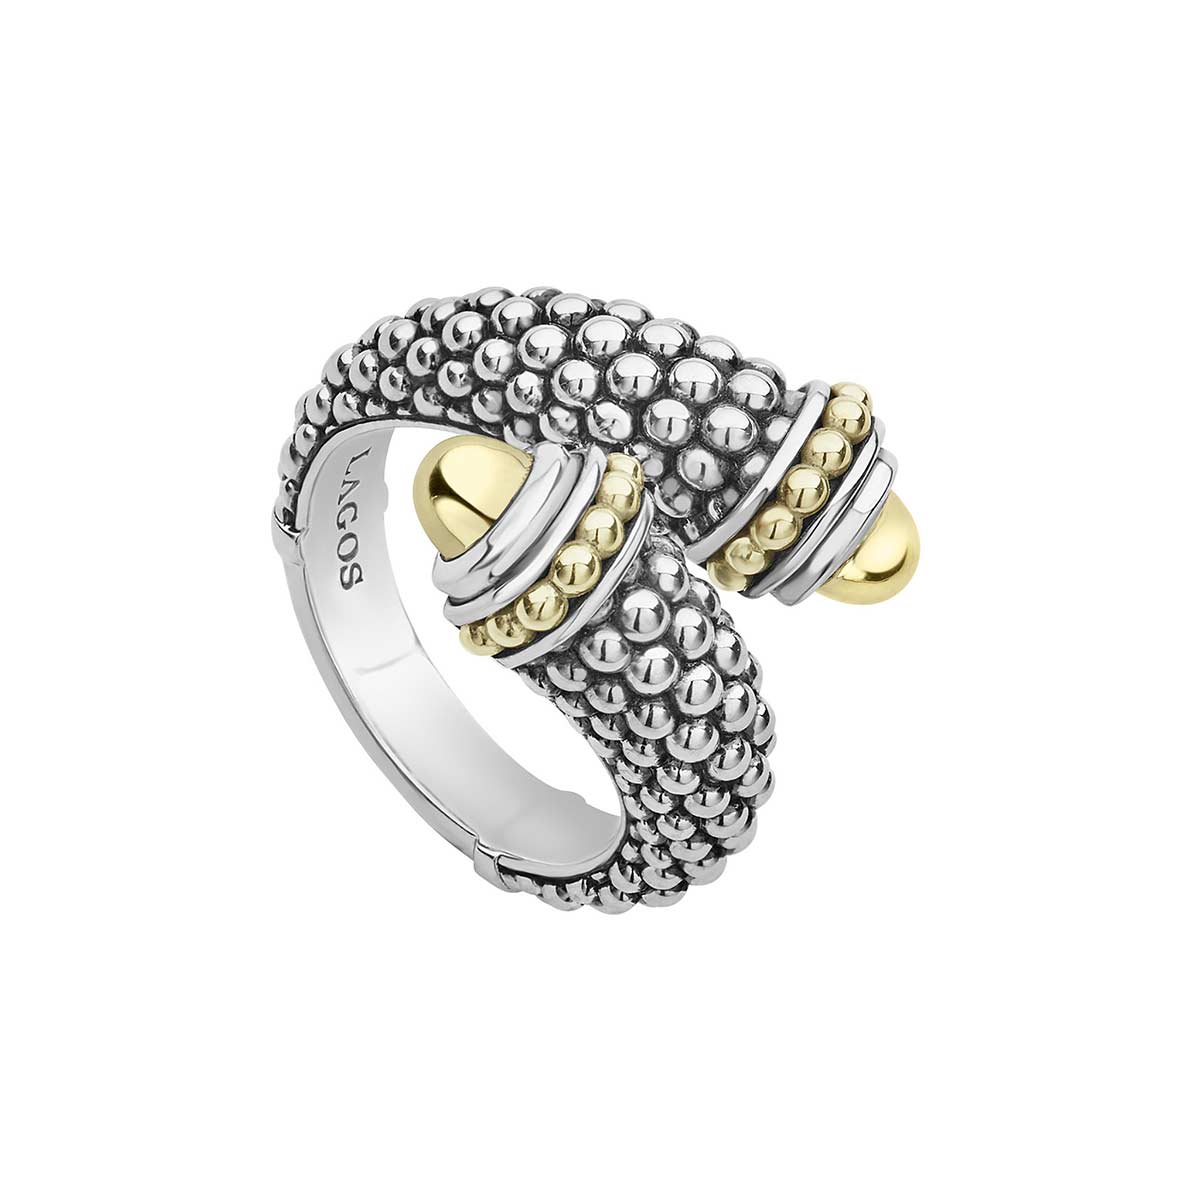 LAGOS Sterling Silver & 18K Yellow Gold Caviar Crossover Ring | Borsheims